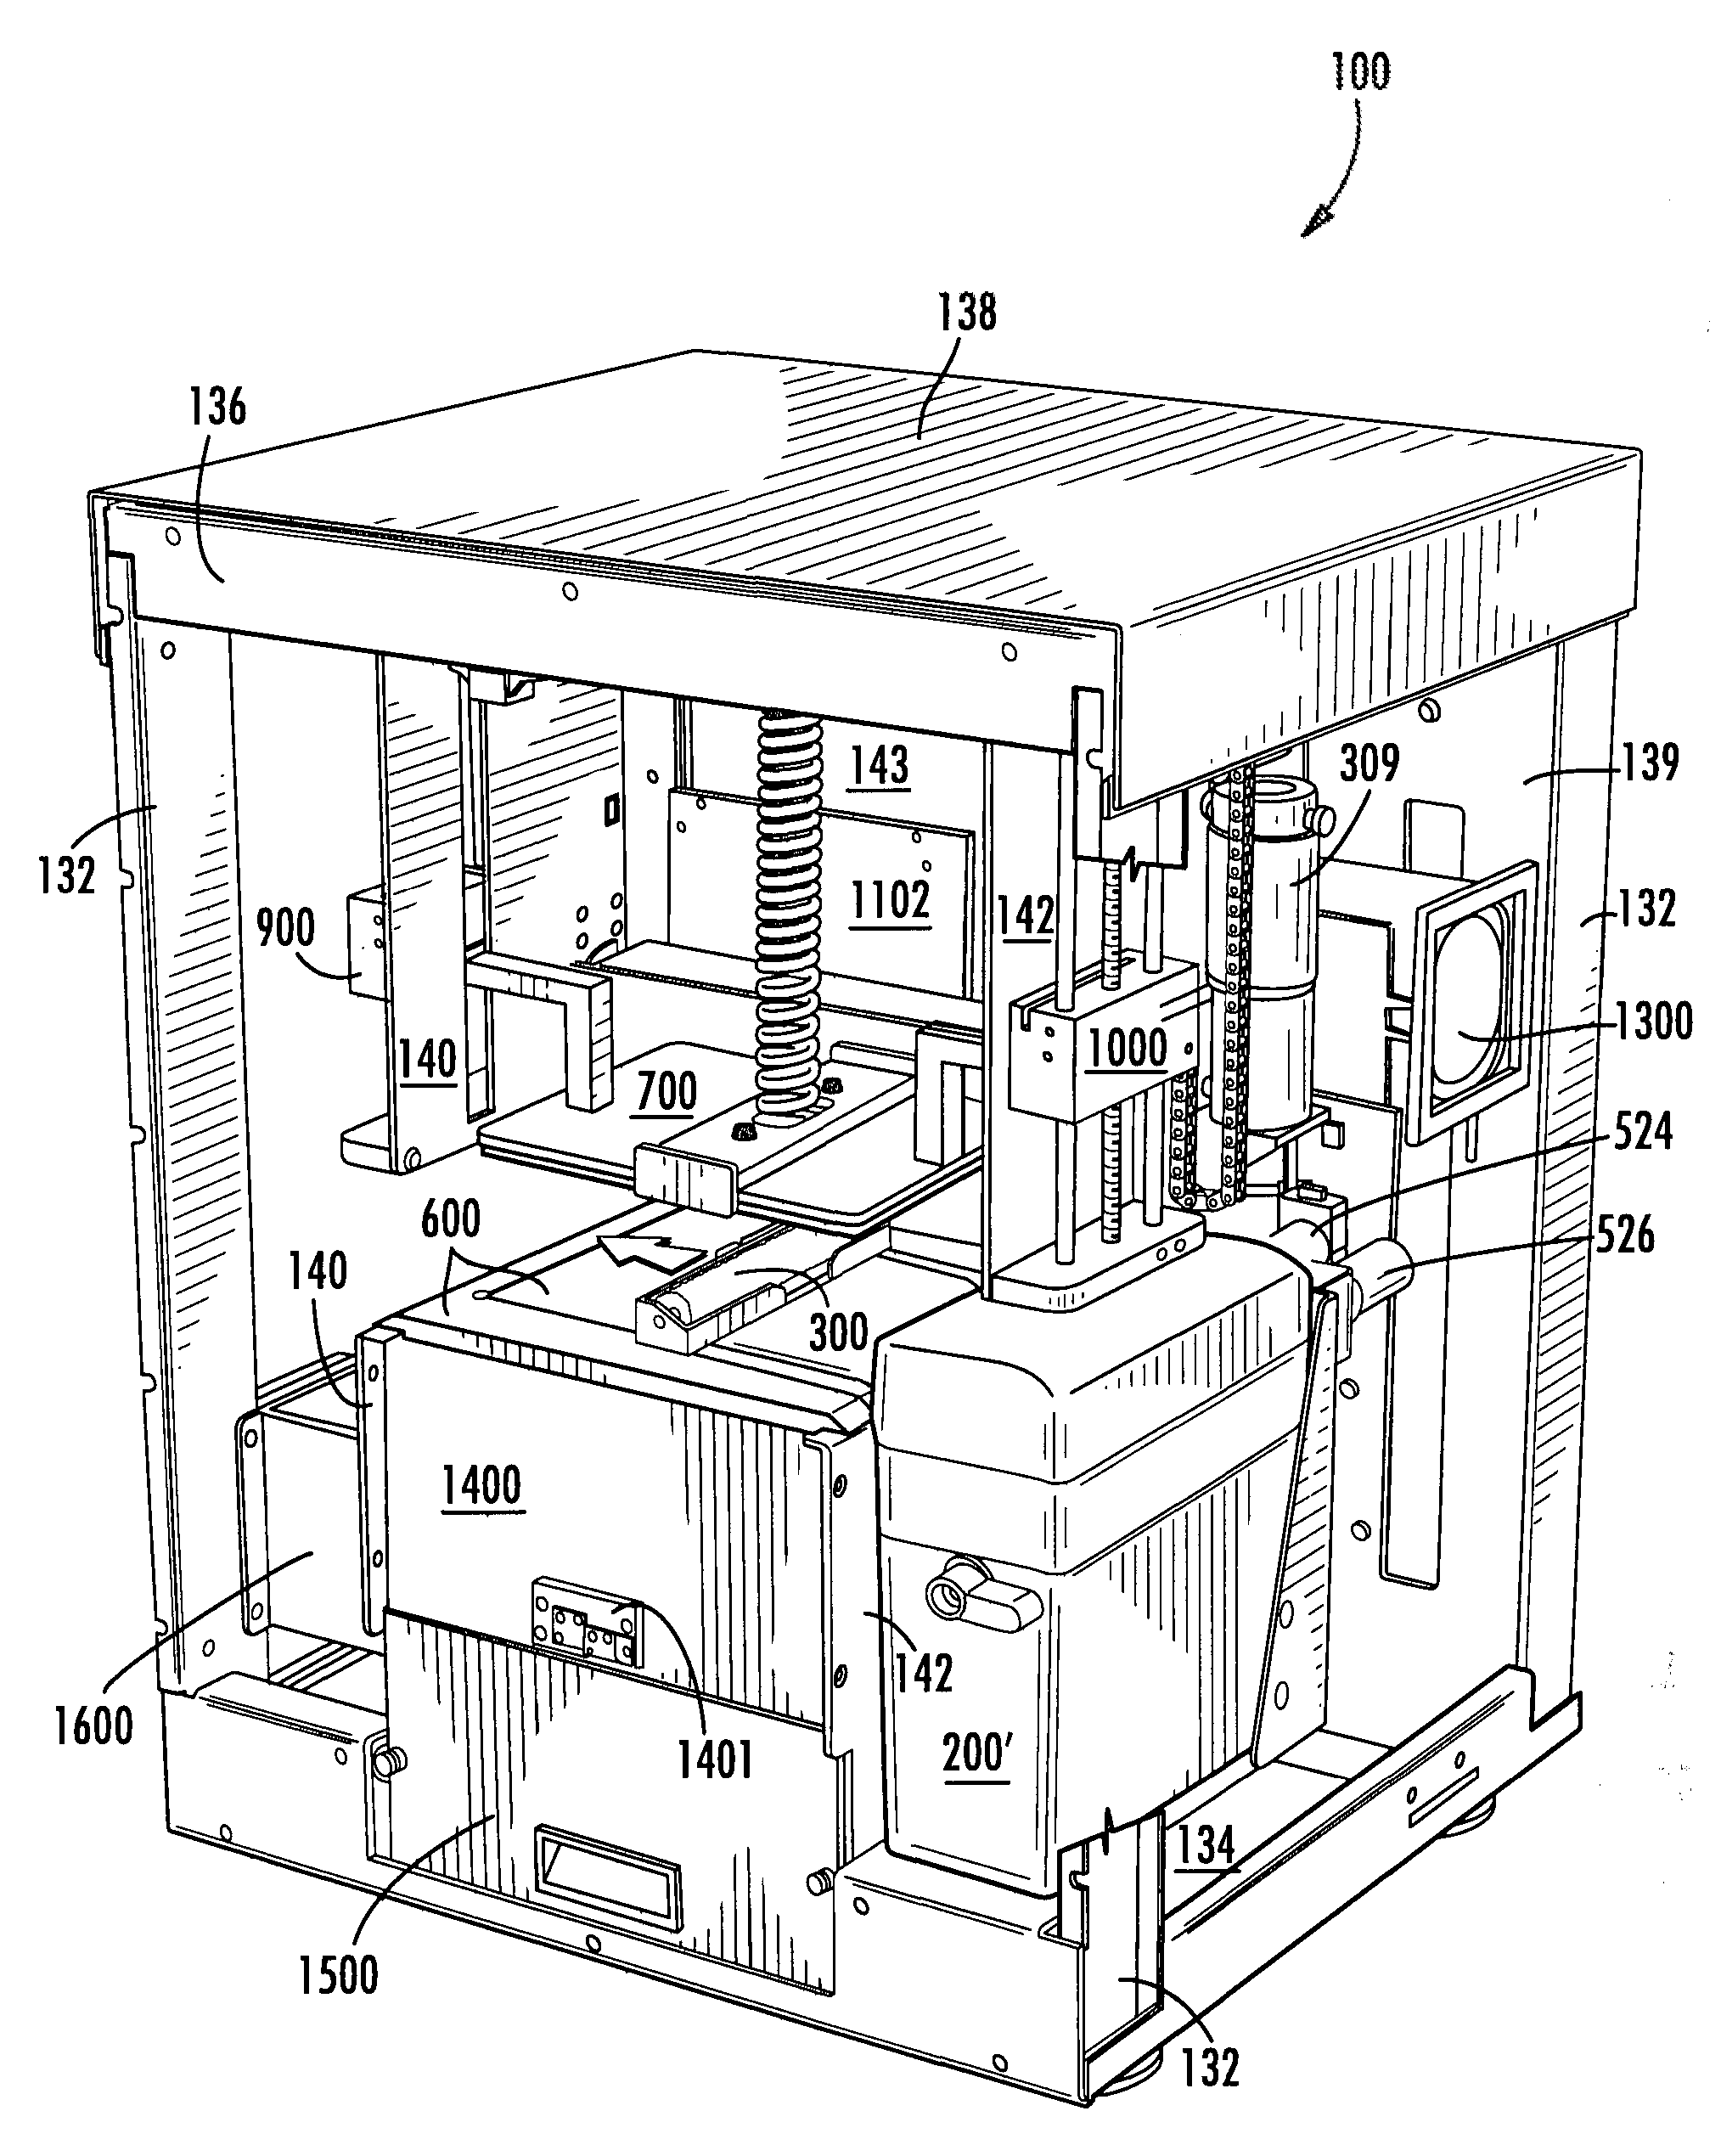 Solid imaging apparatus and method